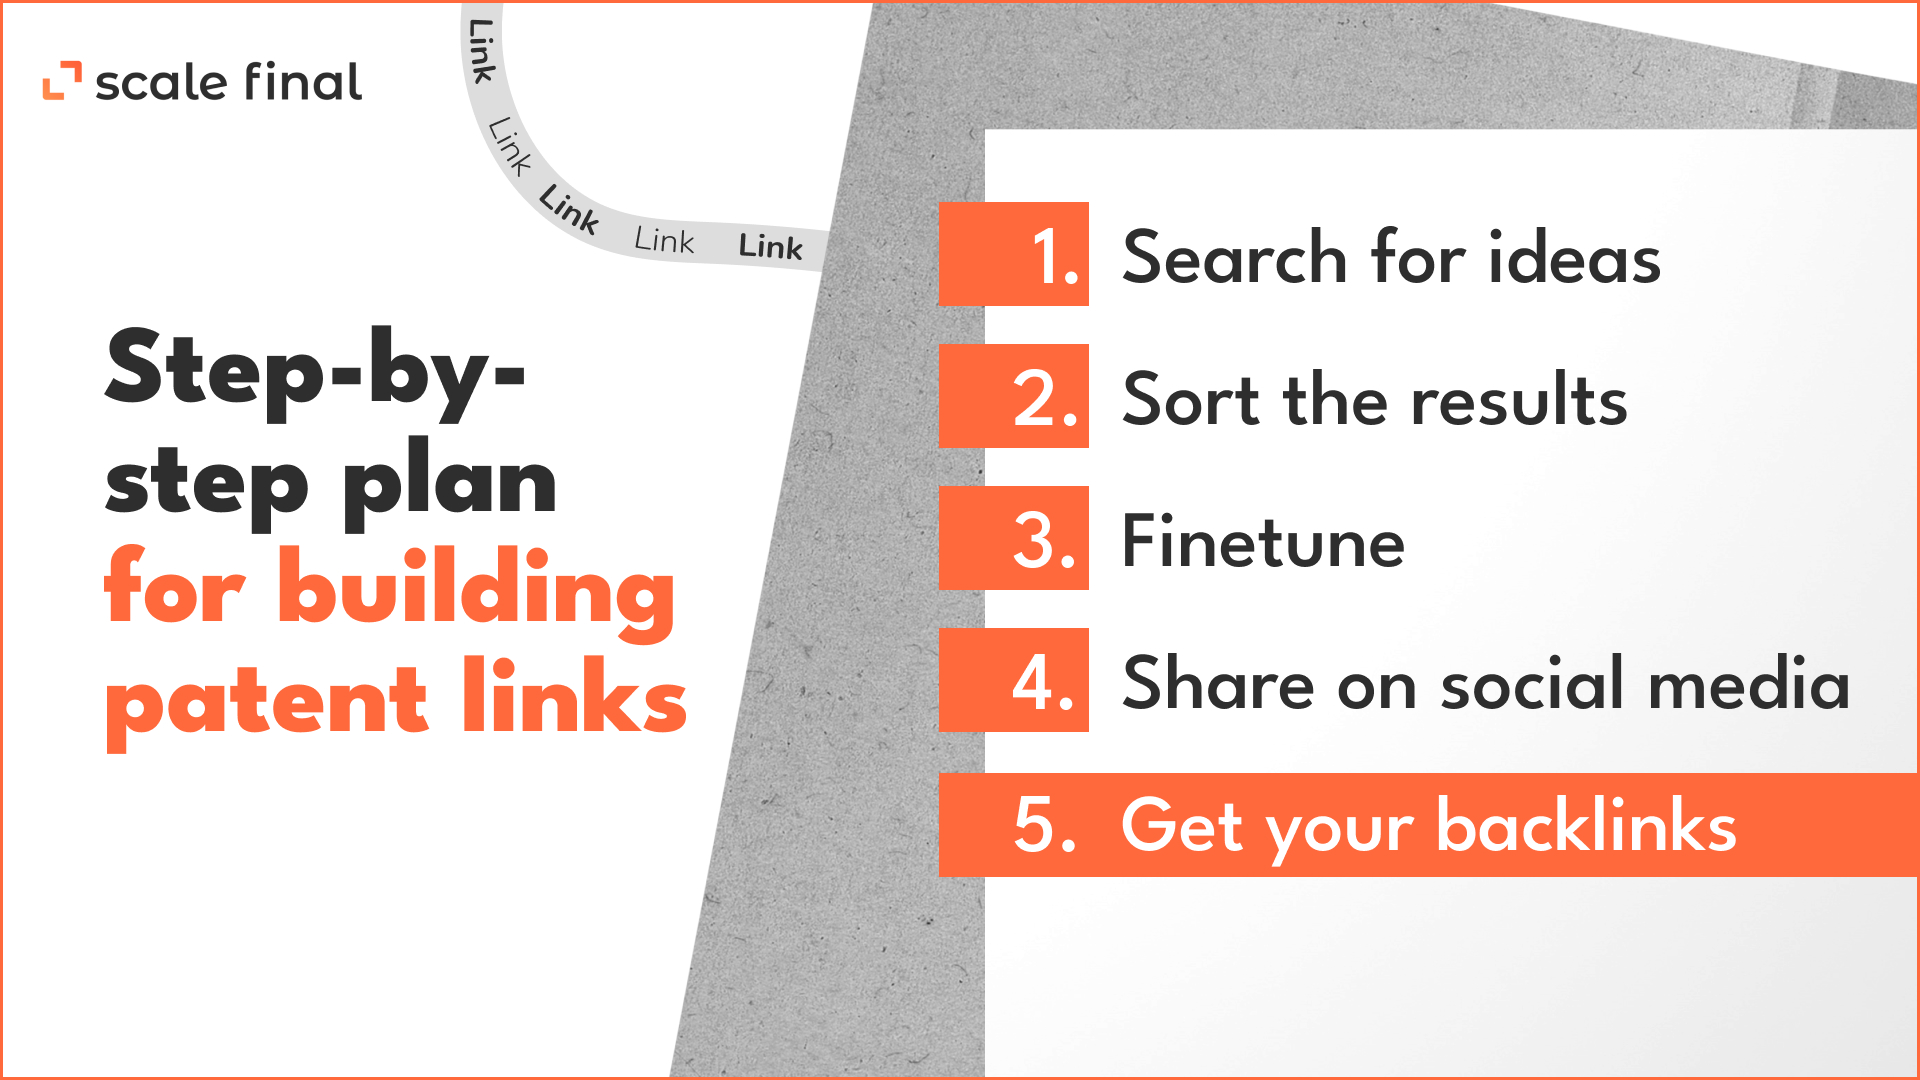 Step-by-step plan for building patent links:
 1. Search for ideas
 2. Sort the results
 3. Finetune
 4. Share on social media
 5. Get your backlinks
